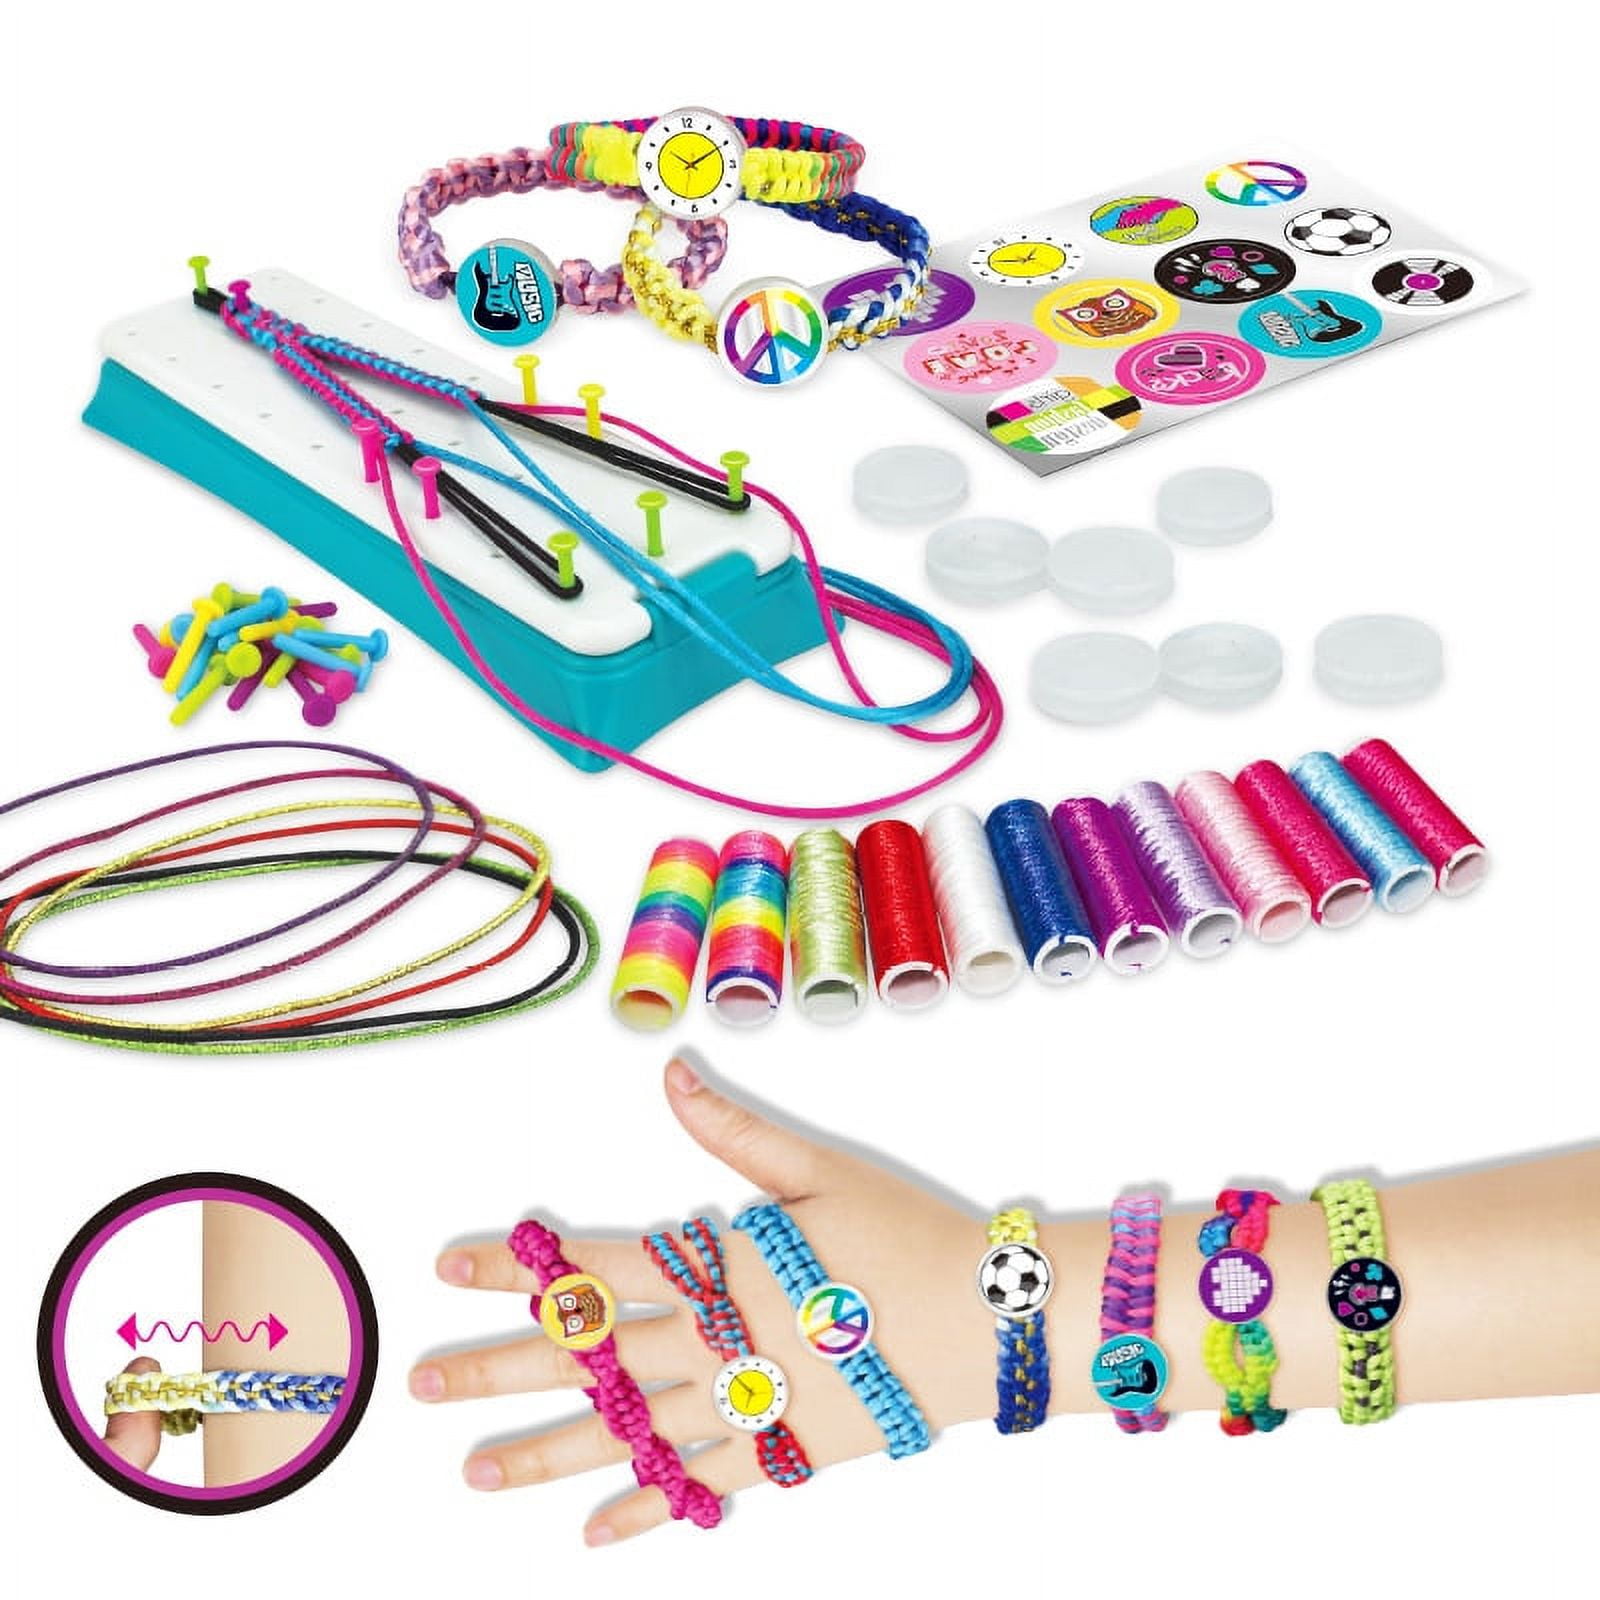  Bracelet Making Kit for Girls, Arts and Crafts for Kids Girls  Ages 6-12, Girls Toys Age 6-12 Art Supplies for Kids 9-12, Jewelry Making  Kit for Girls, 5-10 Year Old Girl